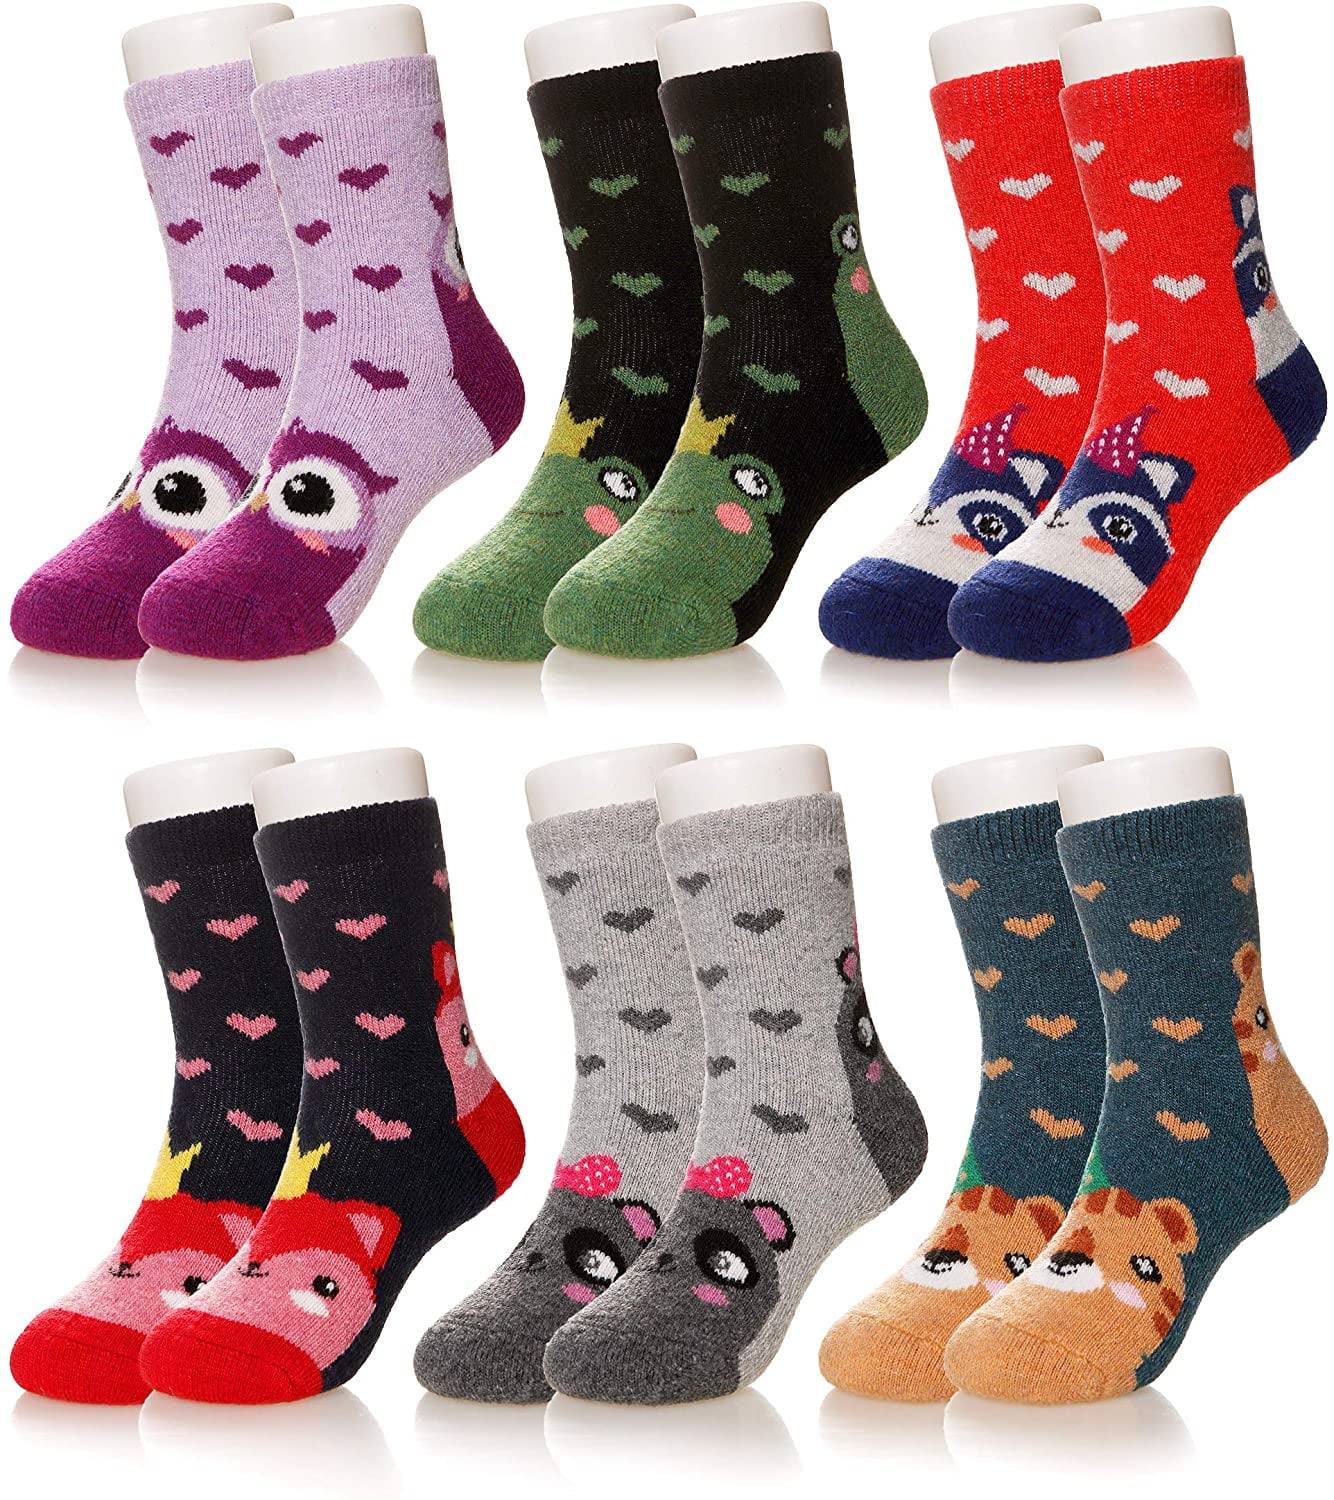 Girls Boys Wool Thick Socks Soft Warm Thermal For Kid Child Toddlers Winter Crew Socks 6 Pairs 